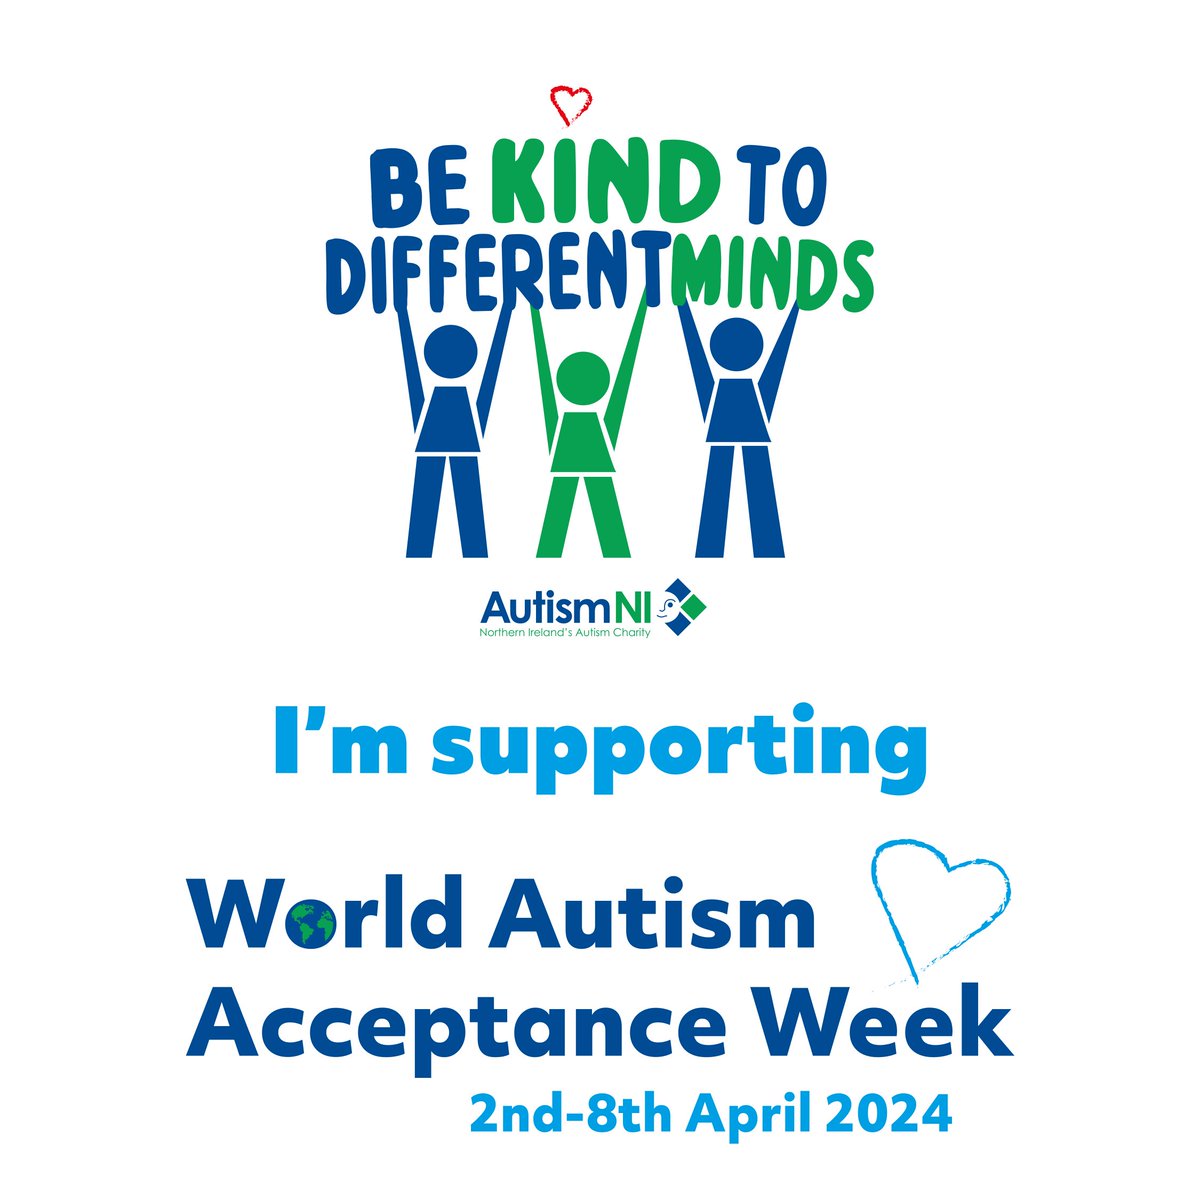 Autistic people are our friends, family, colleagues, and neighbours. We all need to work together for a more inclusive society. Let’s start by seeing things from another perspective. Let’s start by being #kindtodifferentminds. #AutismAcceptanceWeek #Autism